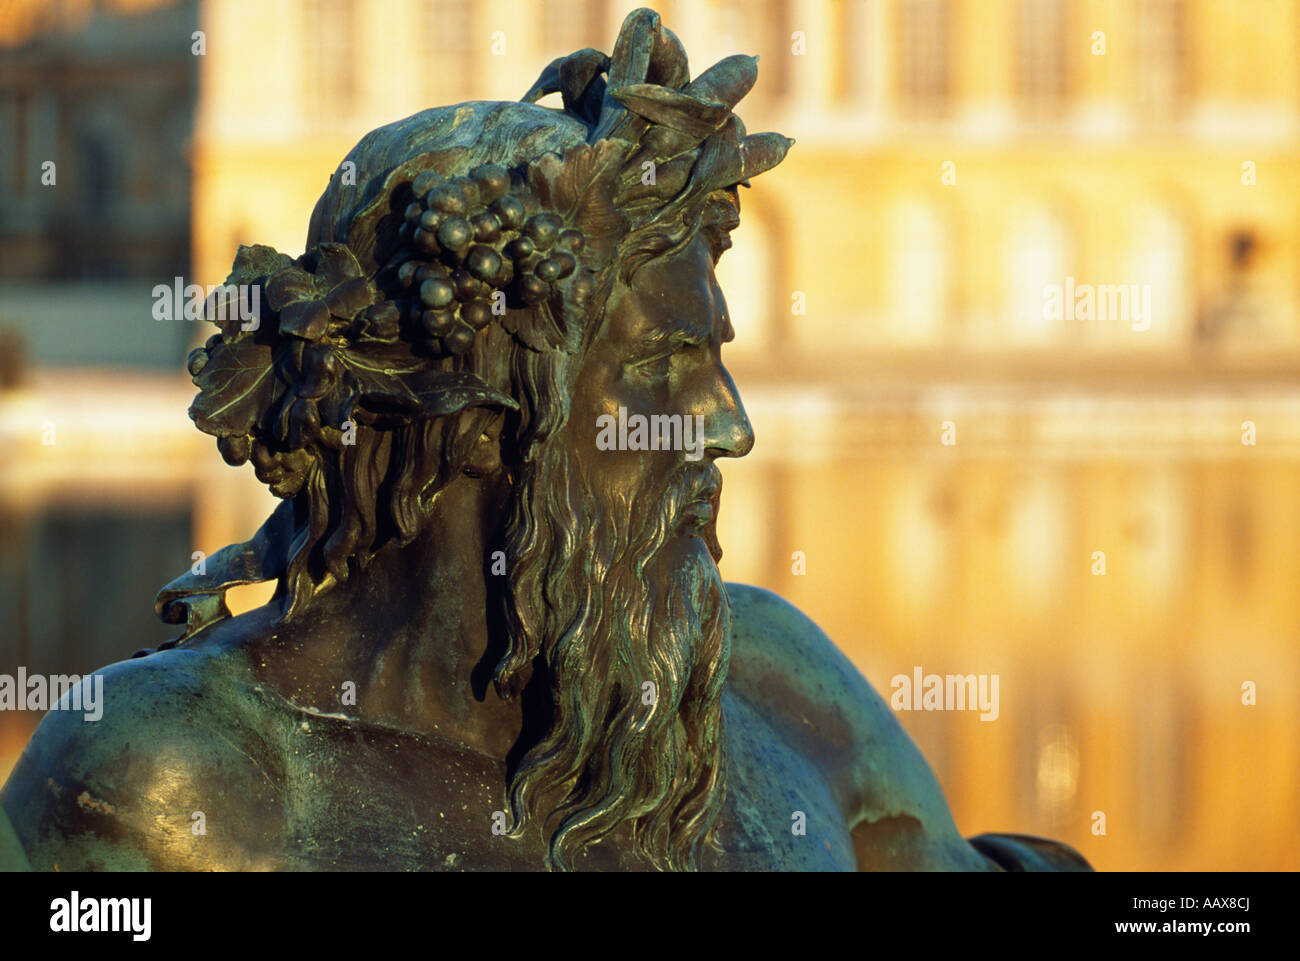 Statue at the Palace of Versailles, France Stock Photo